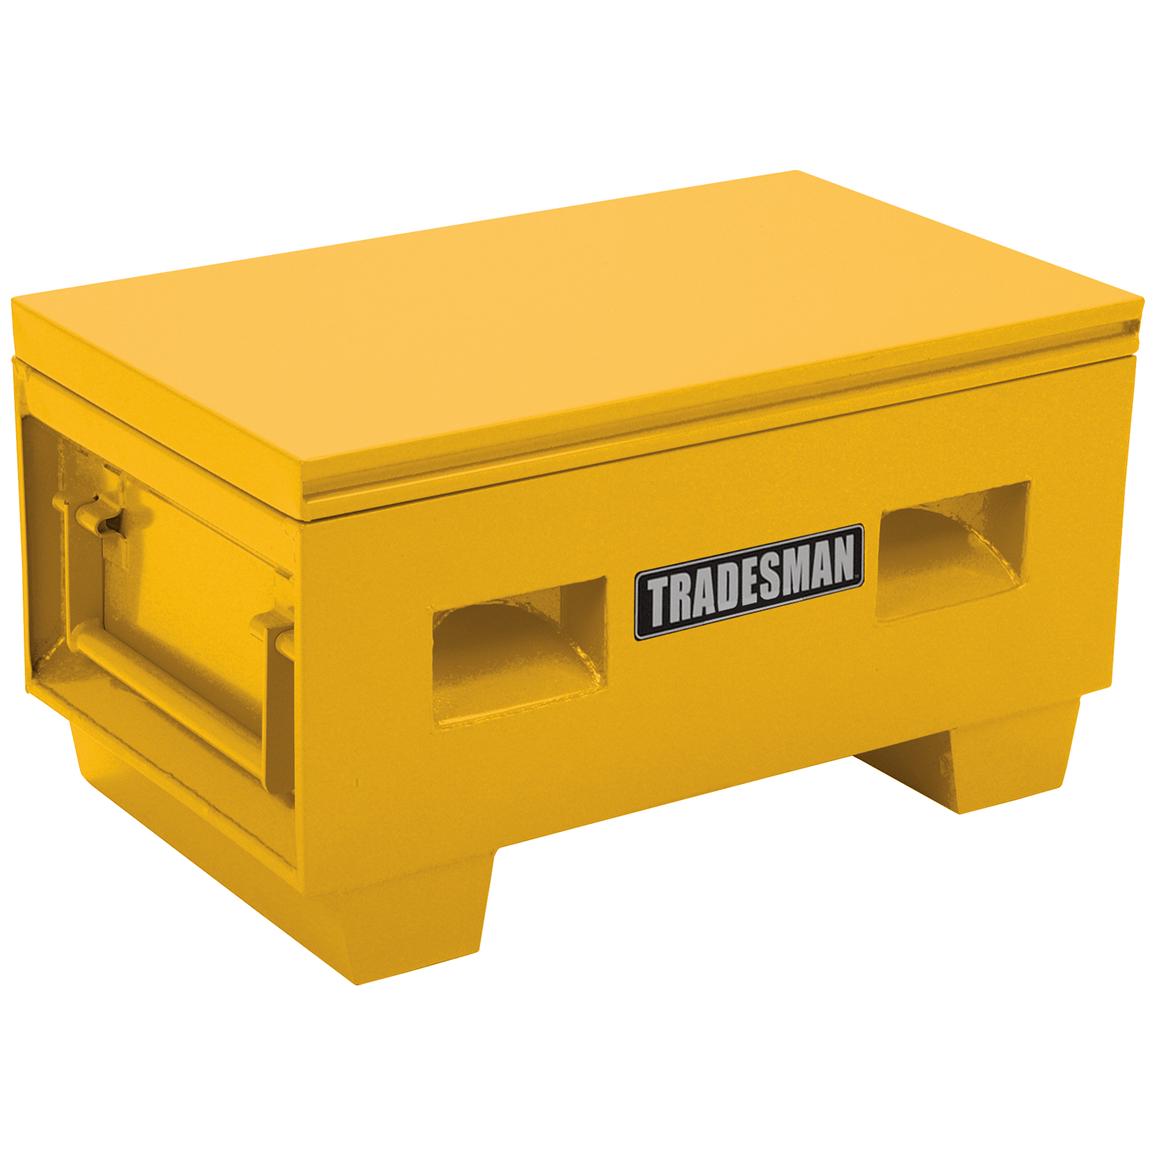 Tradesman® 32 Steel Job Site Box 193006 Tool Boxes At Sportsmans Guide